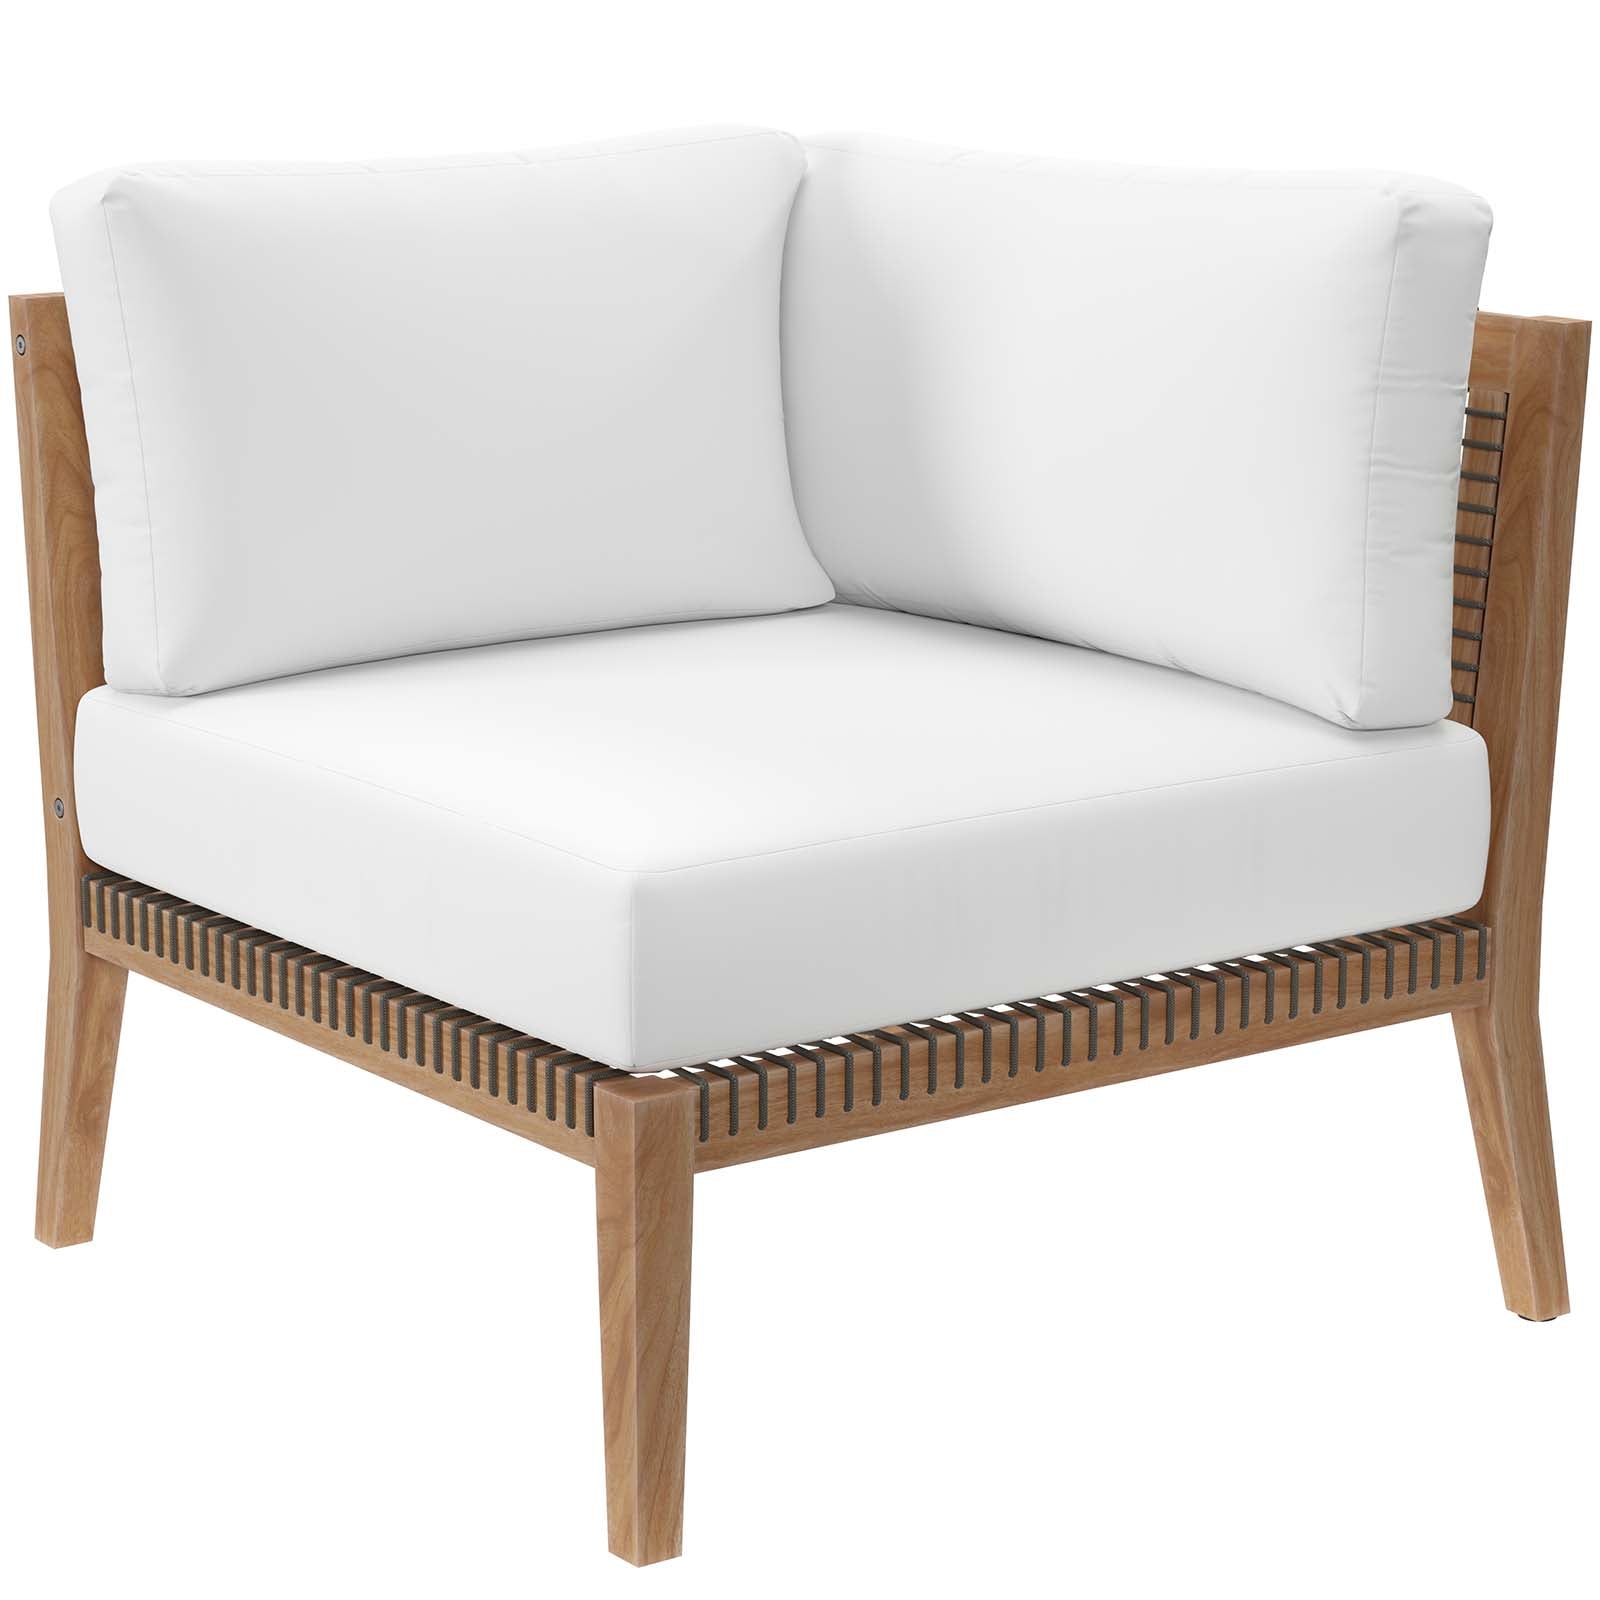 Modway Outdoor Sofas - Clearwater-Outdoor-Patio-Teak-Wood-Corner-Chair-Gray-White